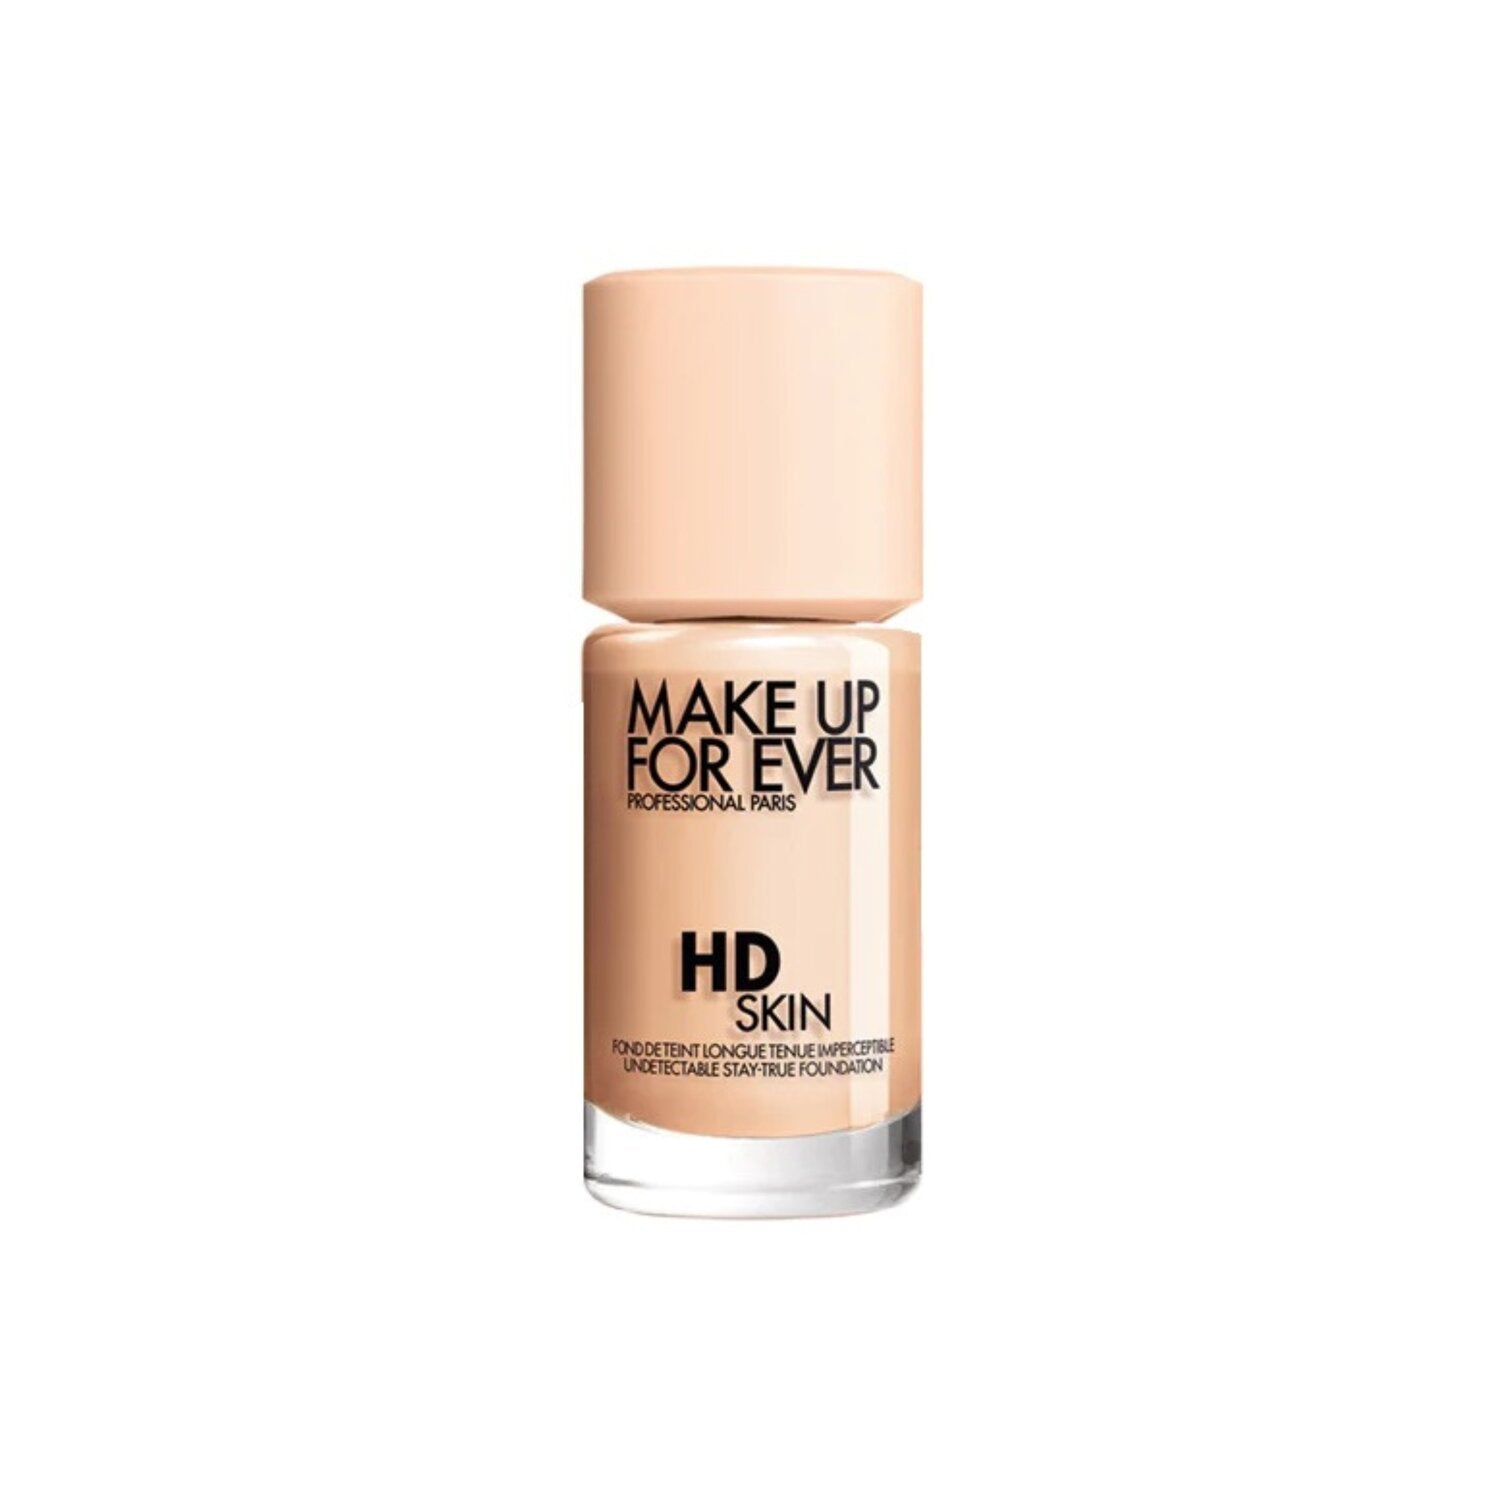 Make Up For Ever Ultra HD Stick Foundation 12.5g Shade 115 / R230